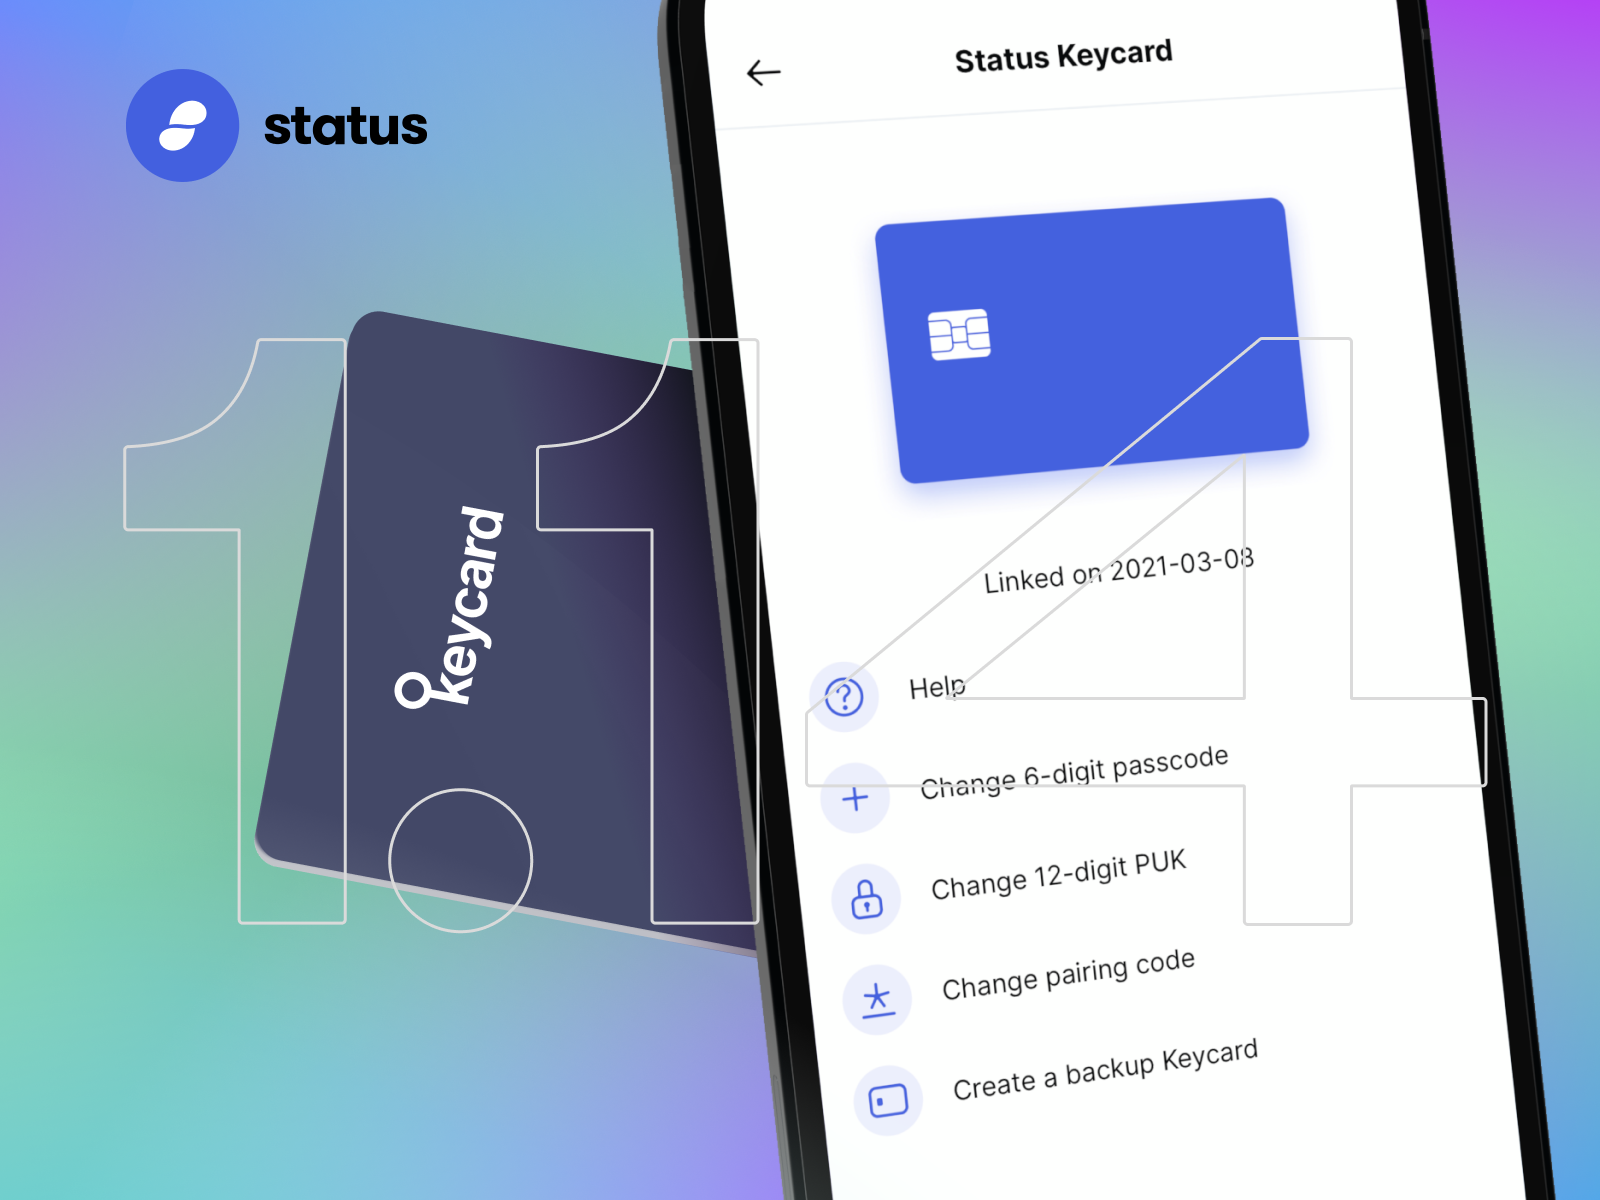 v1.14 Release - New Keycard Features and UX improvements